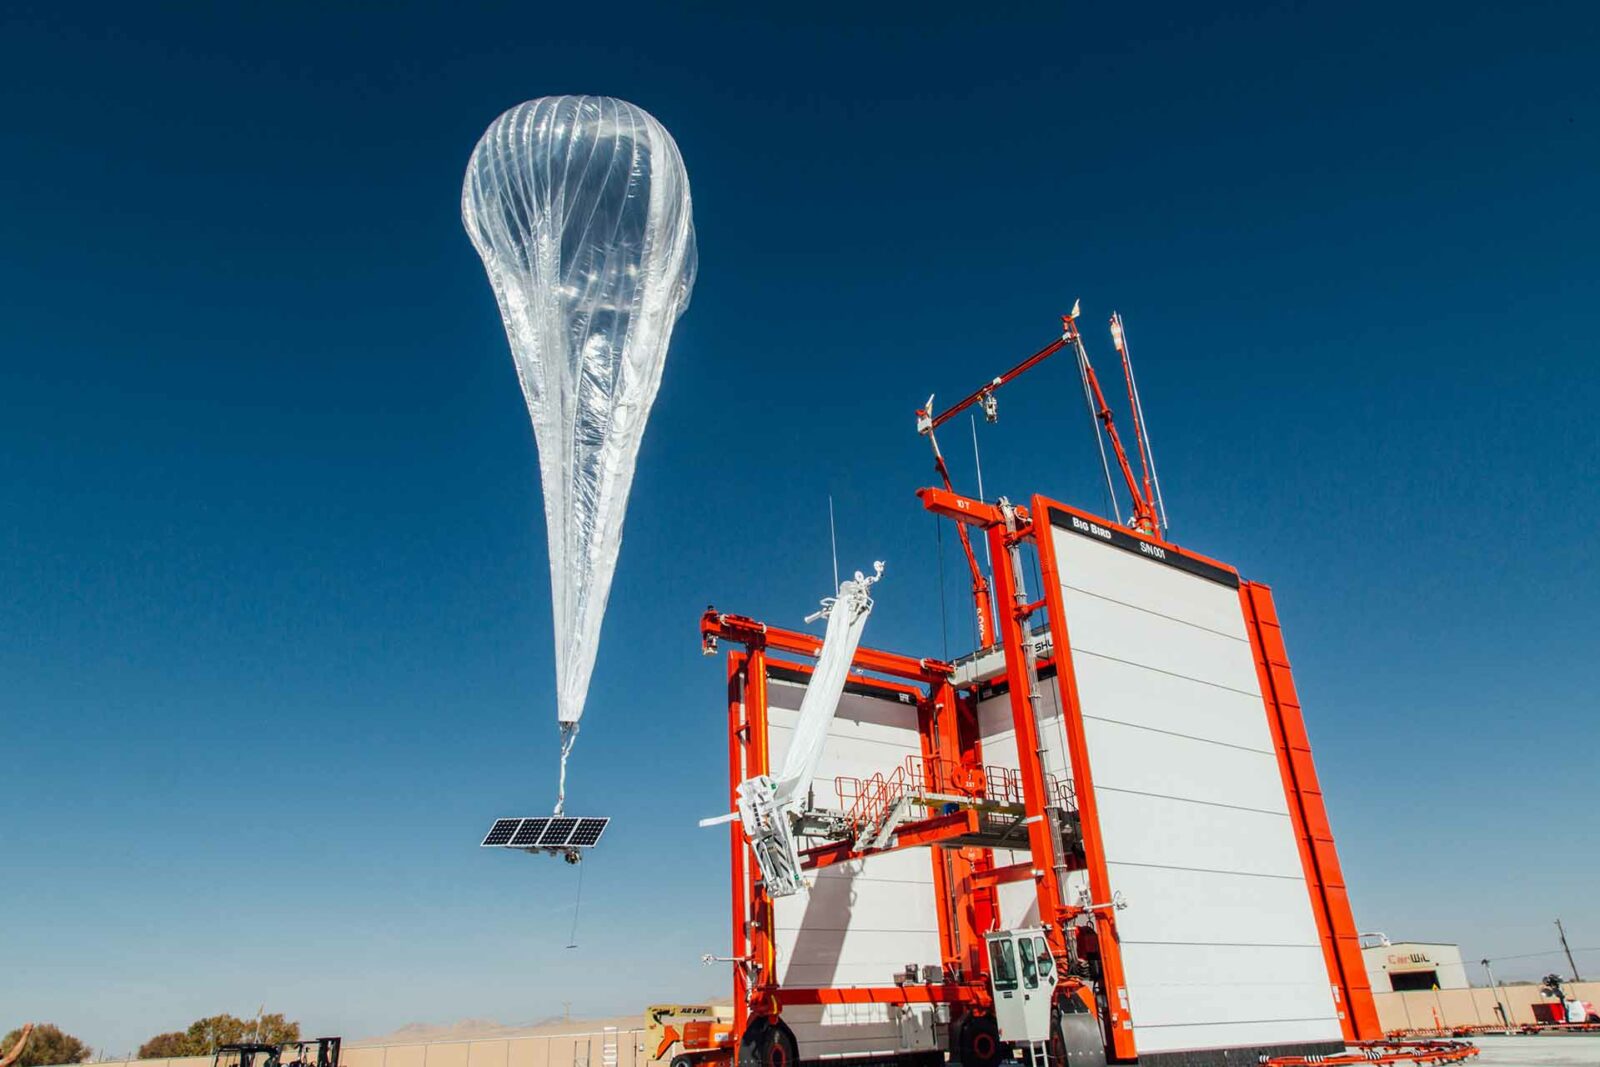 google's project loon launched in Kenya